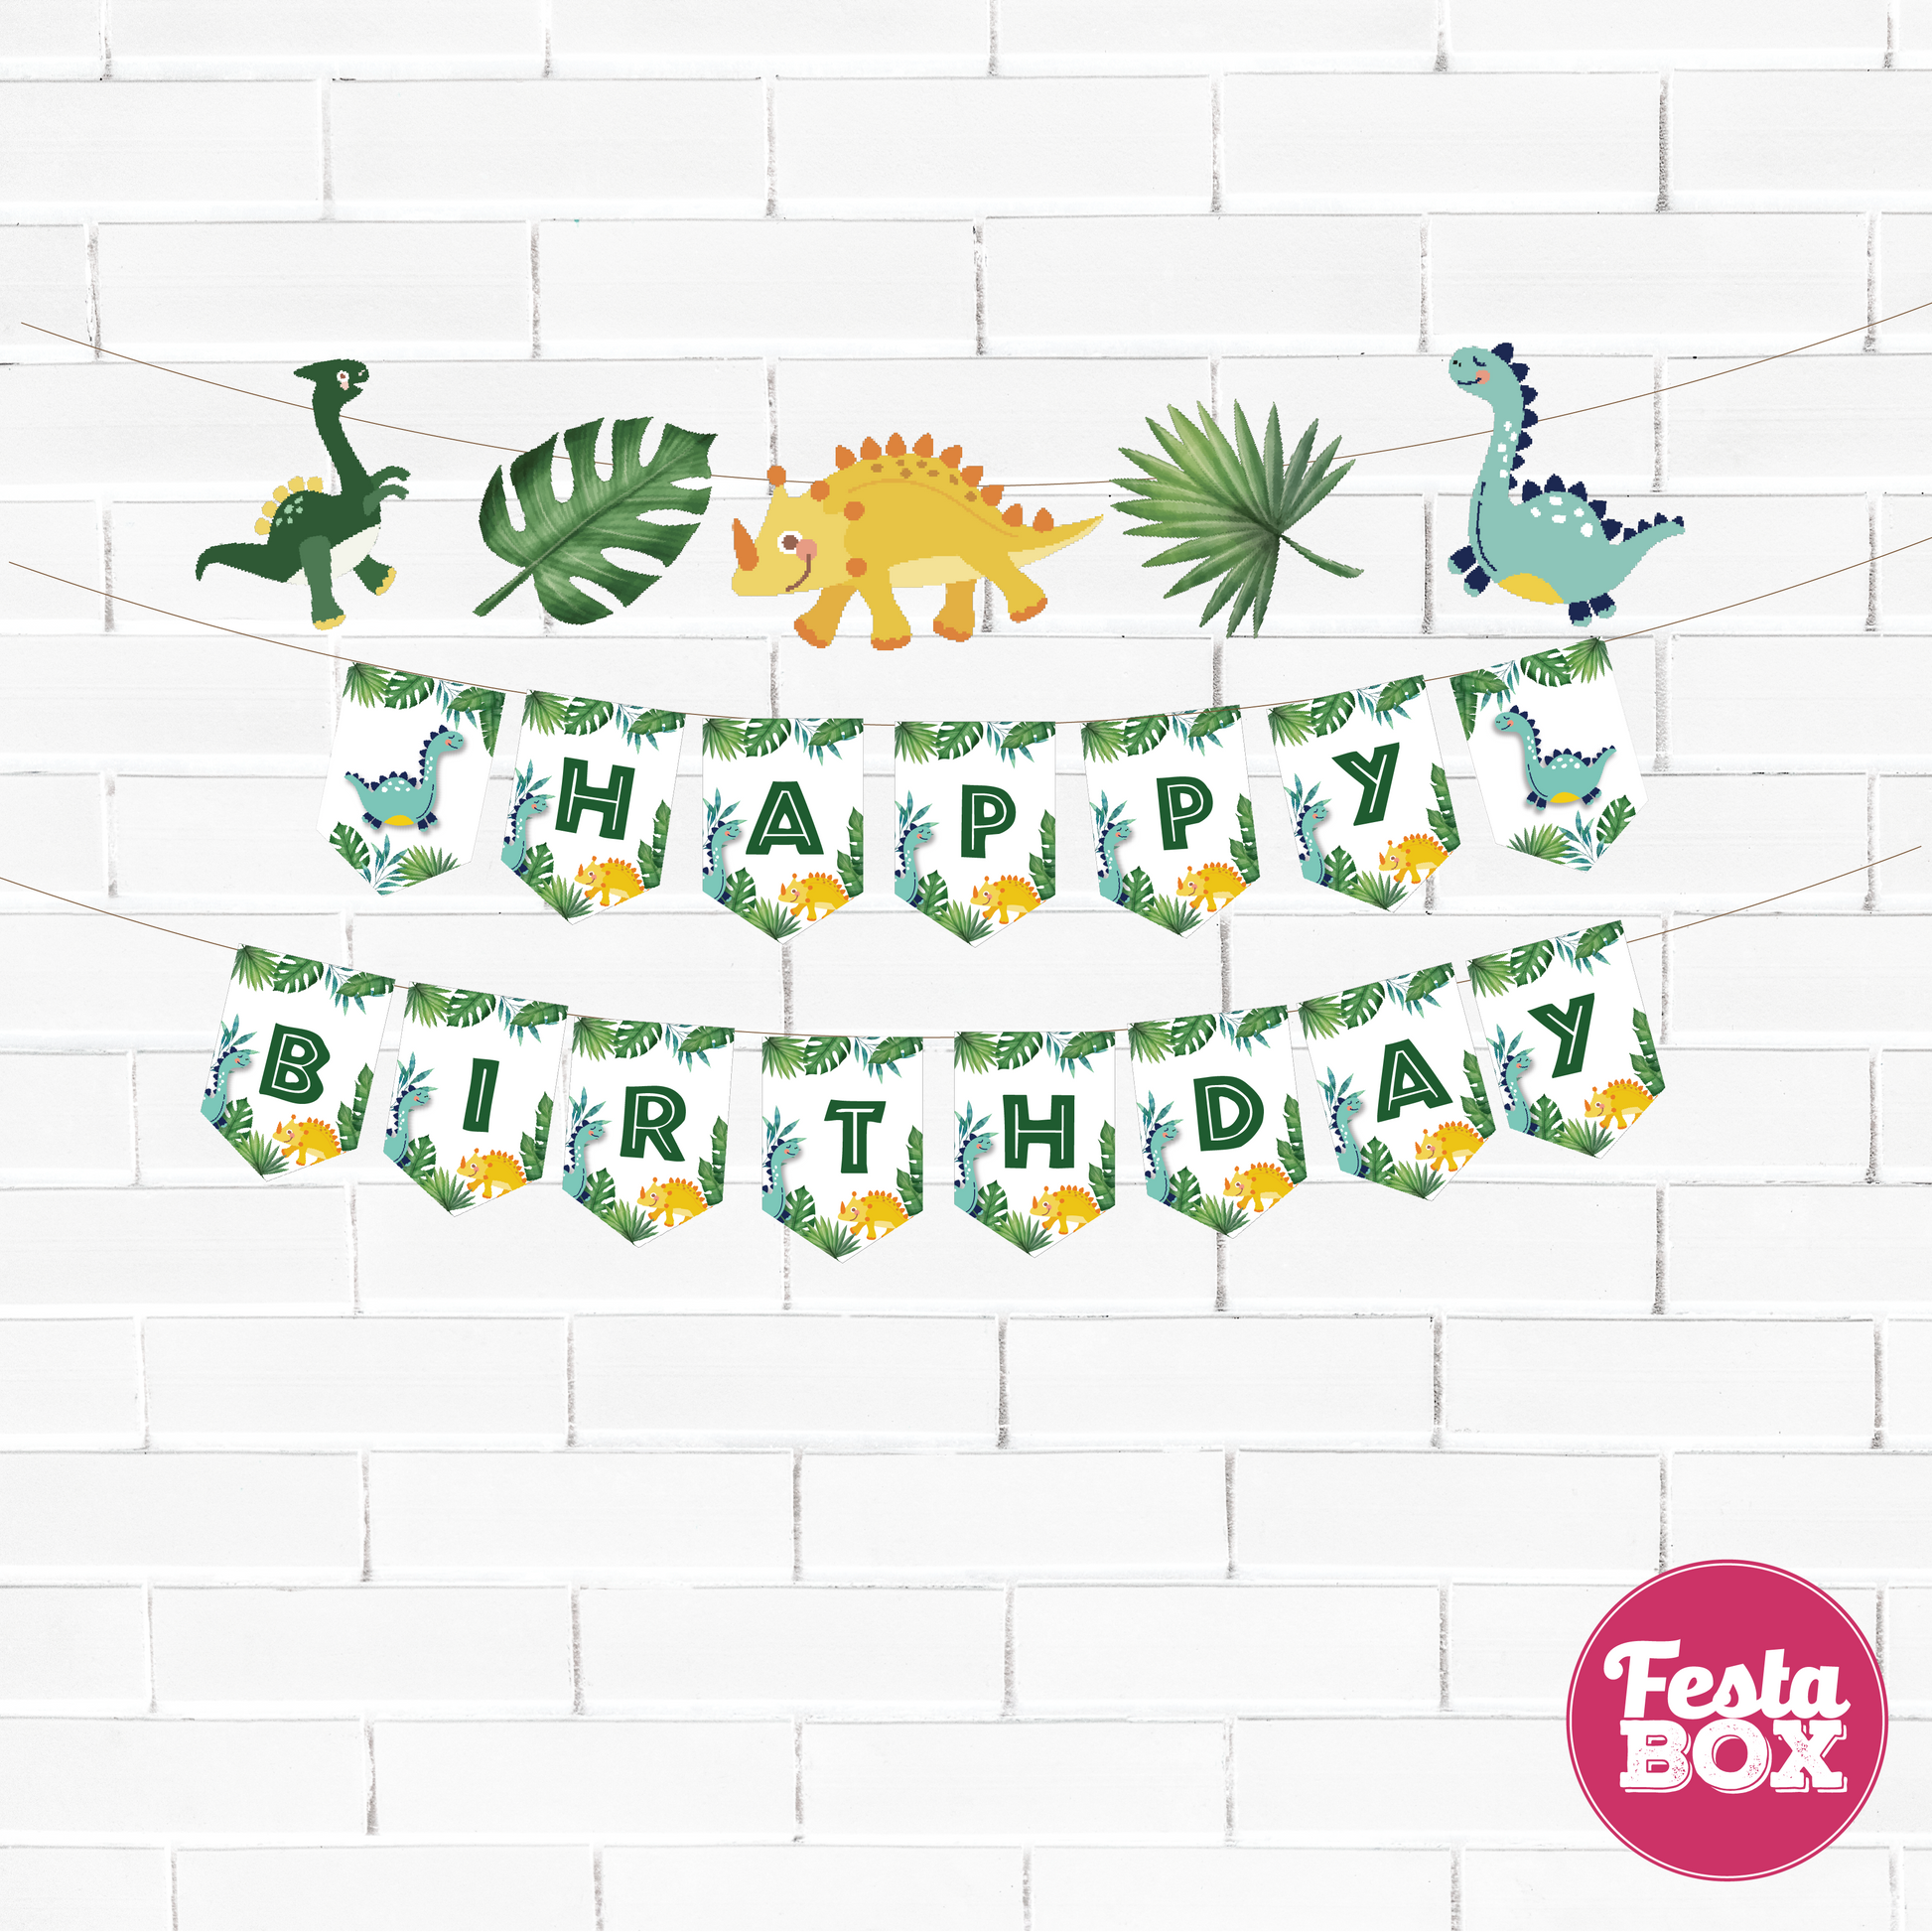 Background Banner for Birthday Party Decoration - Dinosaur Theme